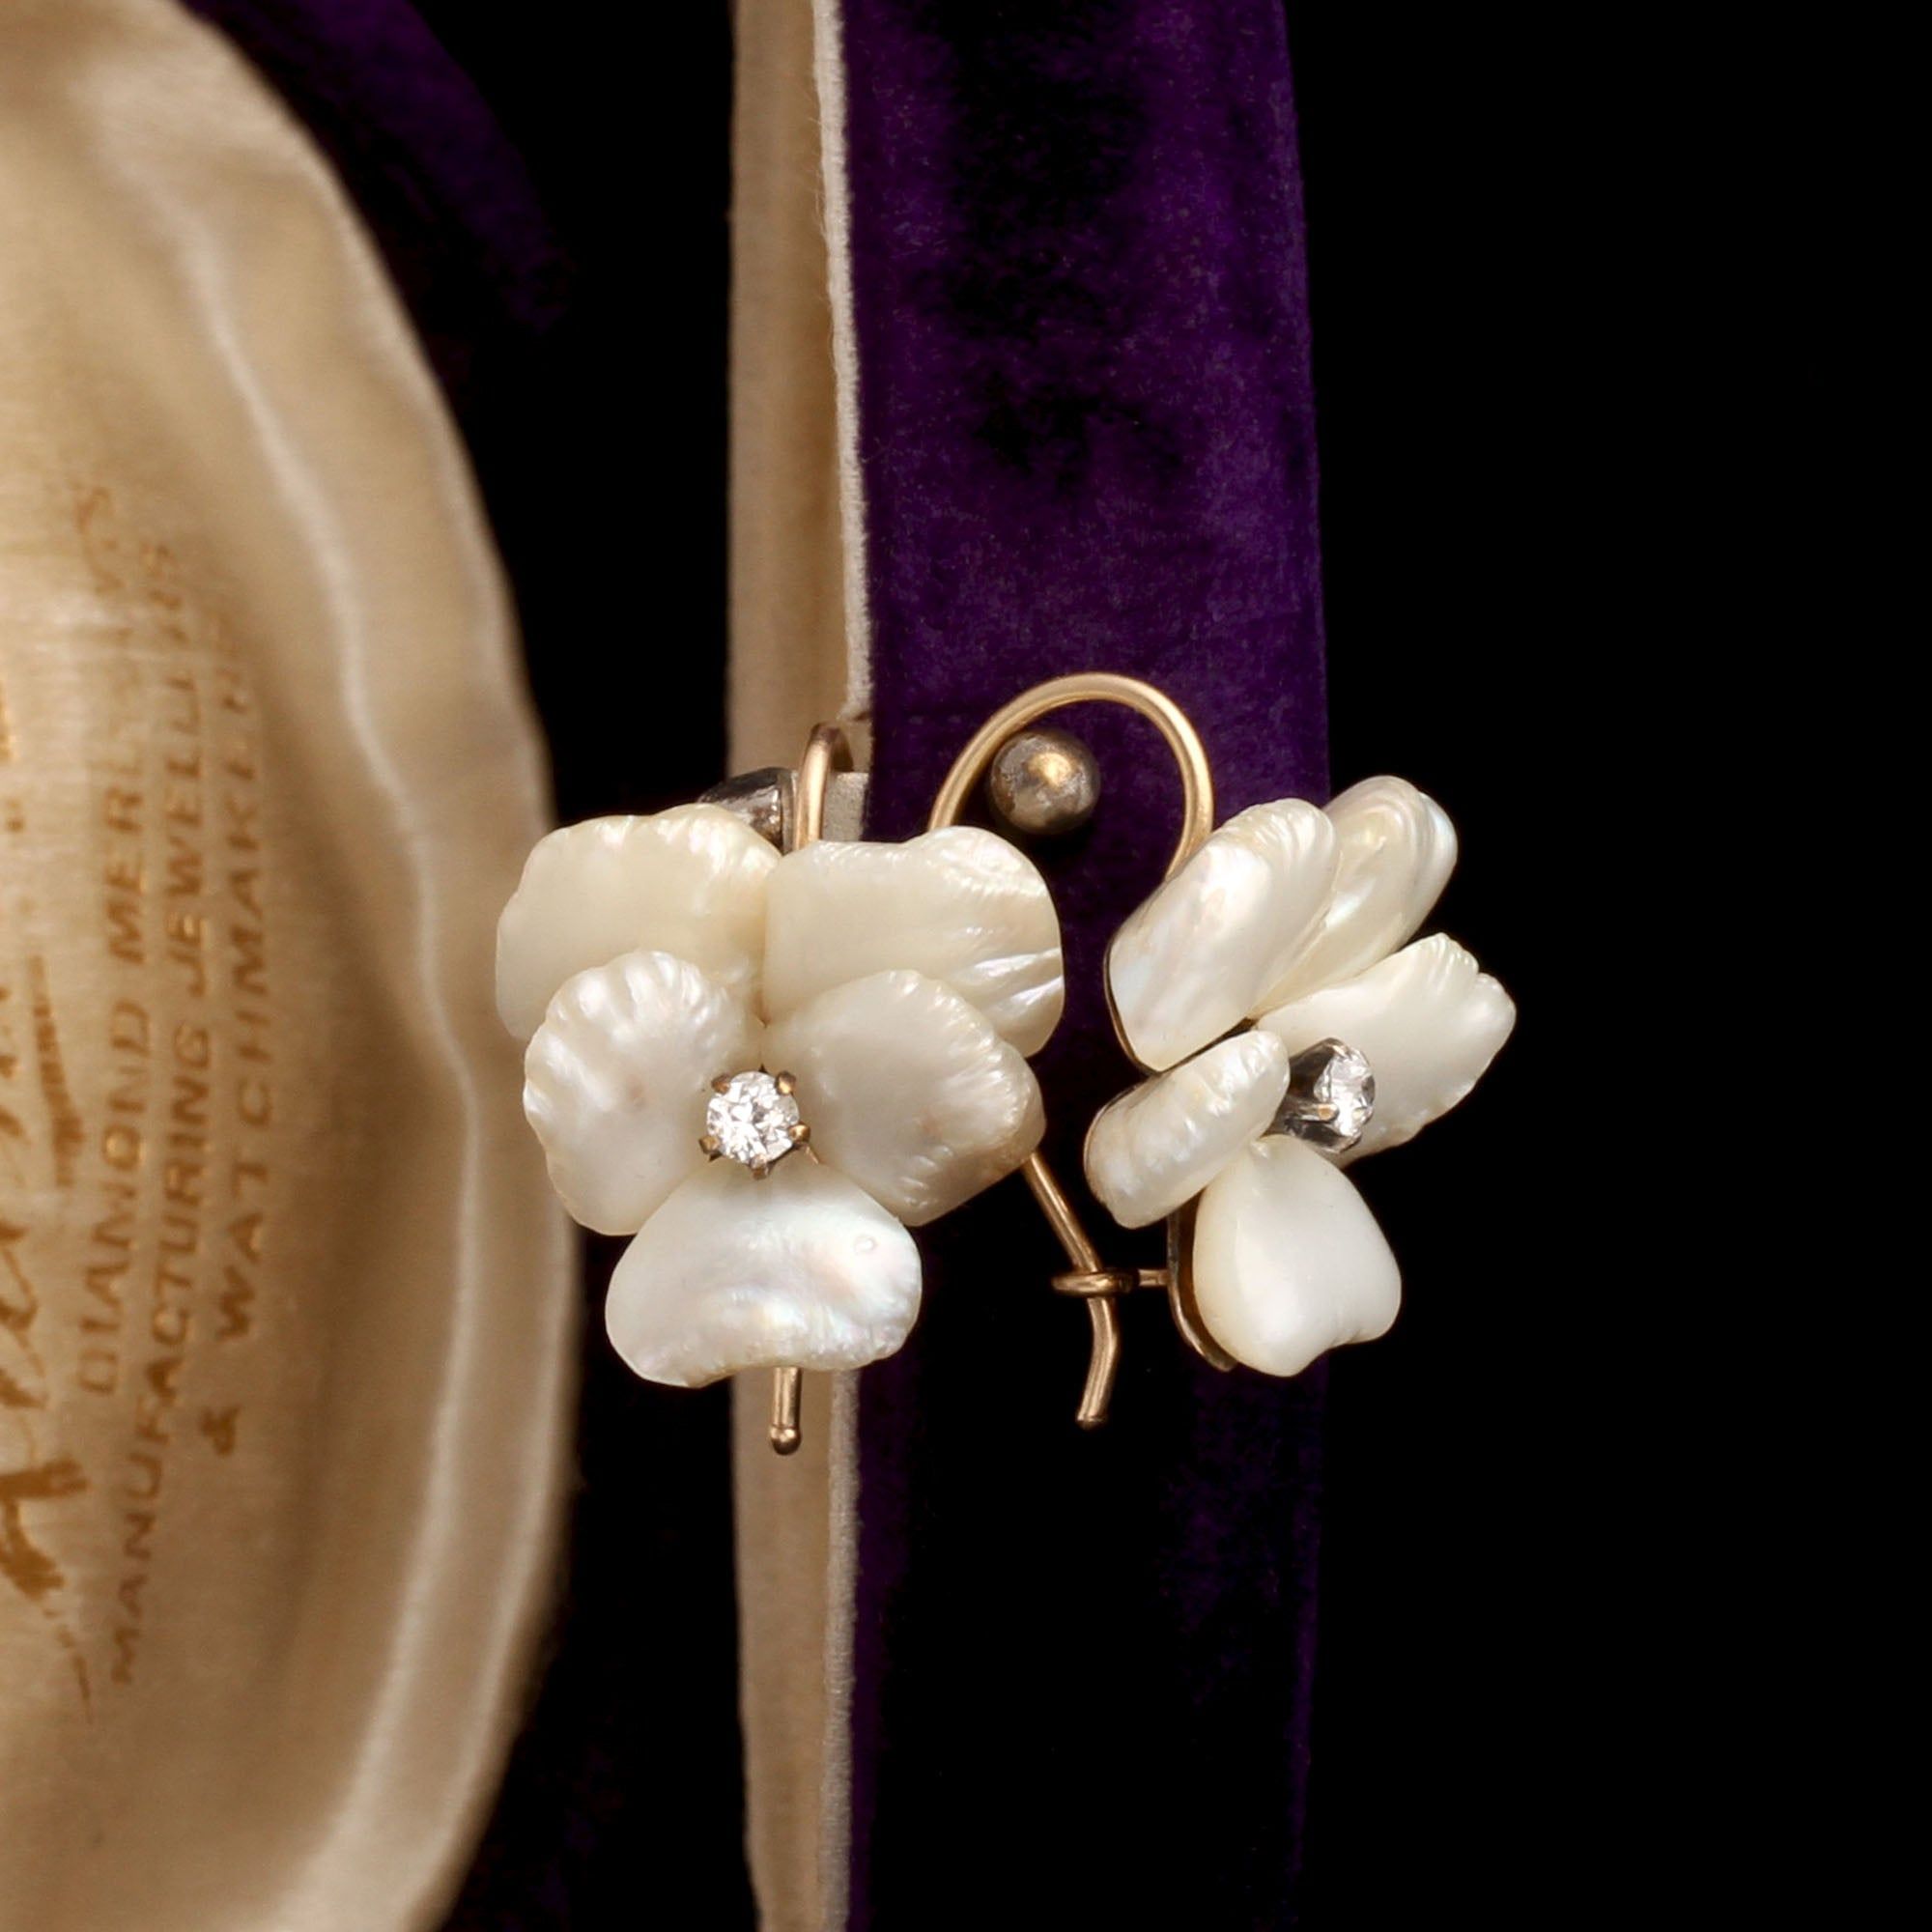 Early 20th Century Mississippi Mud Pearl Pansy Earrings